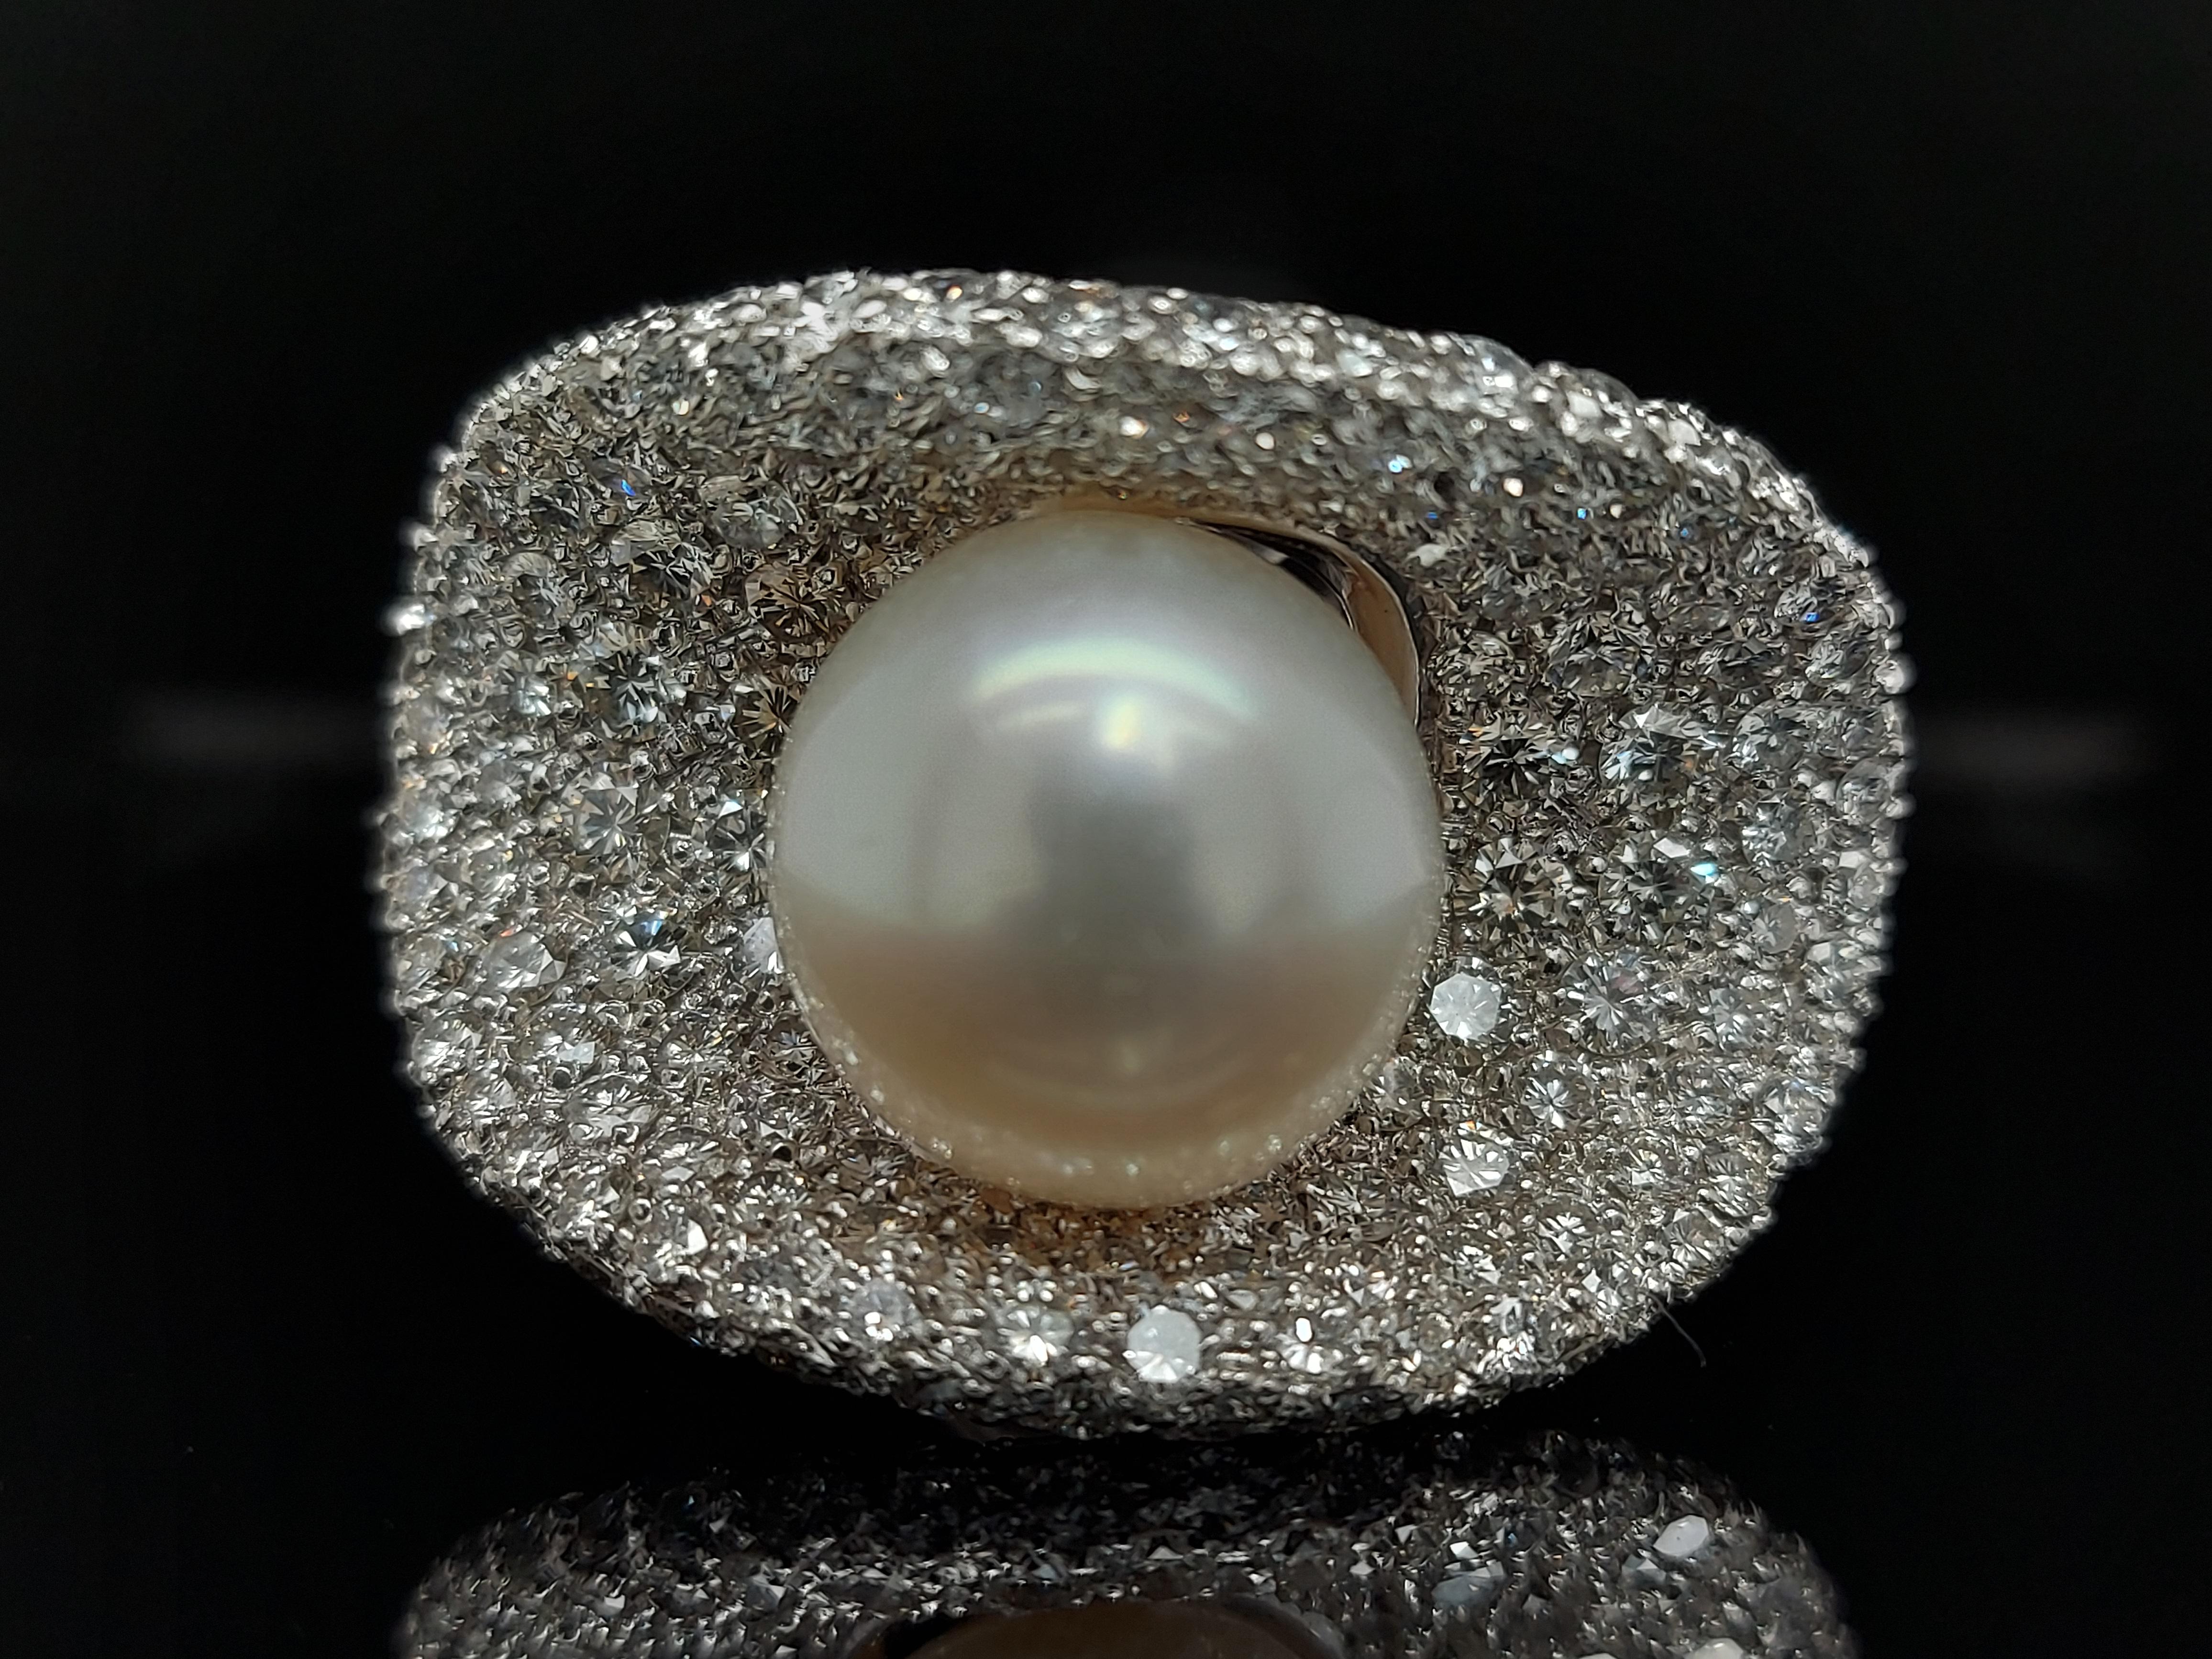 Magnificent 18 Karat White Gold Ring with 14.5 Carat Diamonds and a Big Pearl For Sale 5